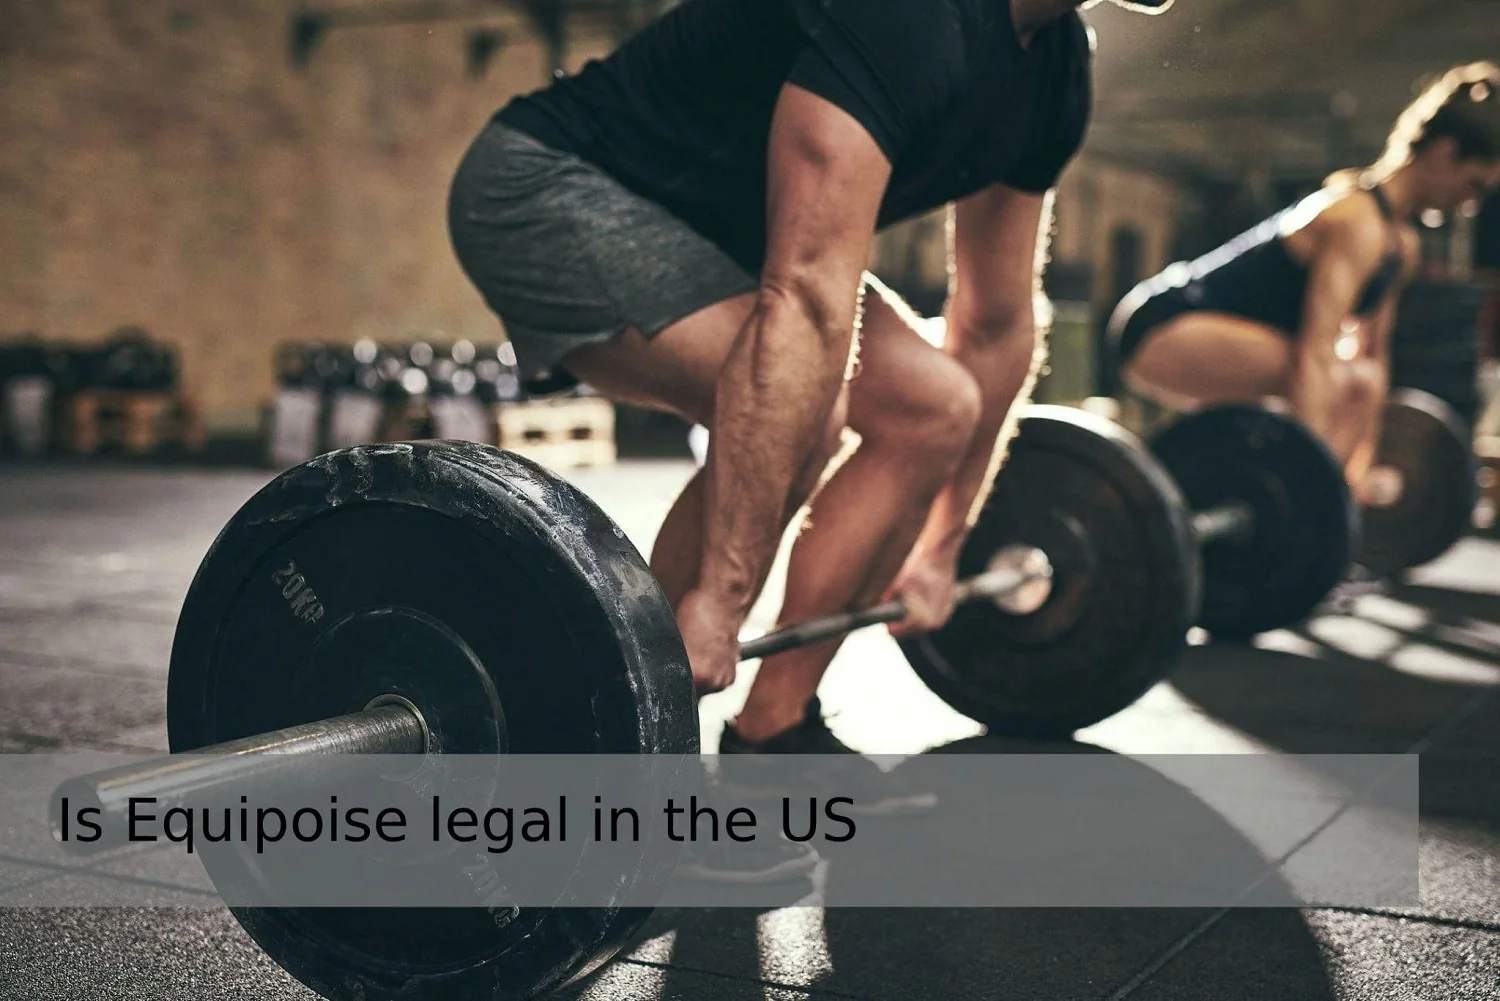 Equipoise legality in US